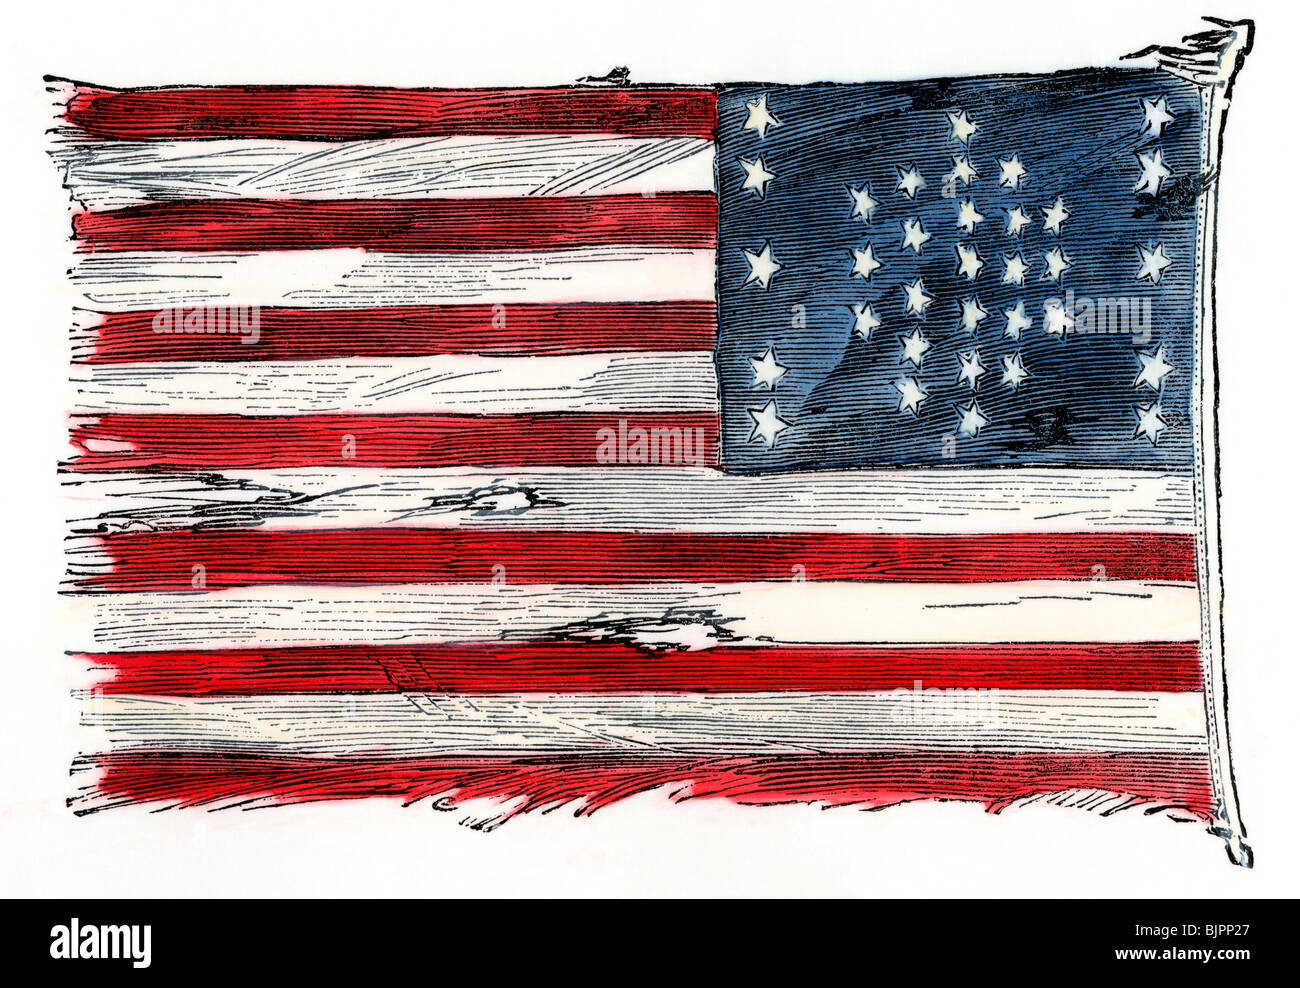 Fort Sumter's US flag after the bombardment, as raised in New York in 1861 by Major Anderson, Sumter commander. Hand-colored woodcut Stock Photo